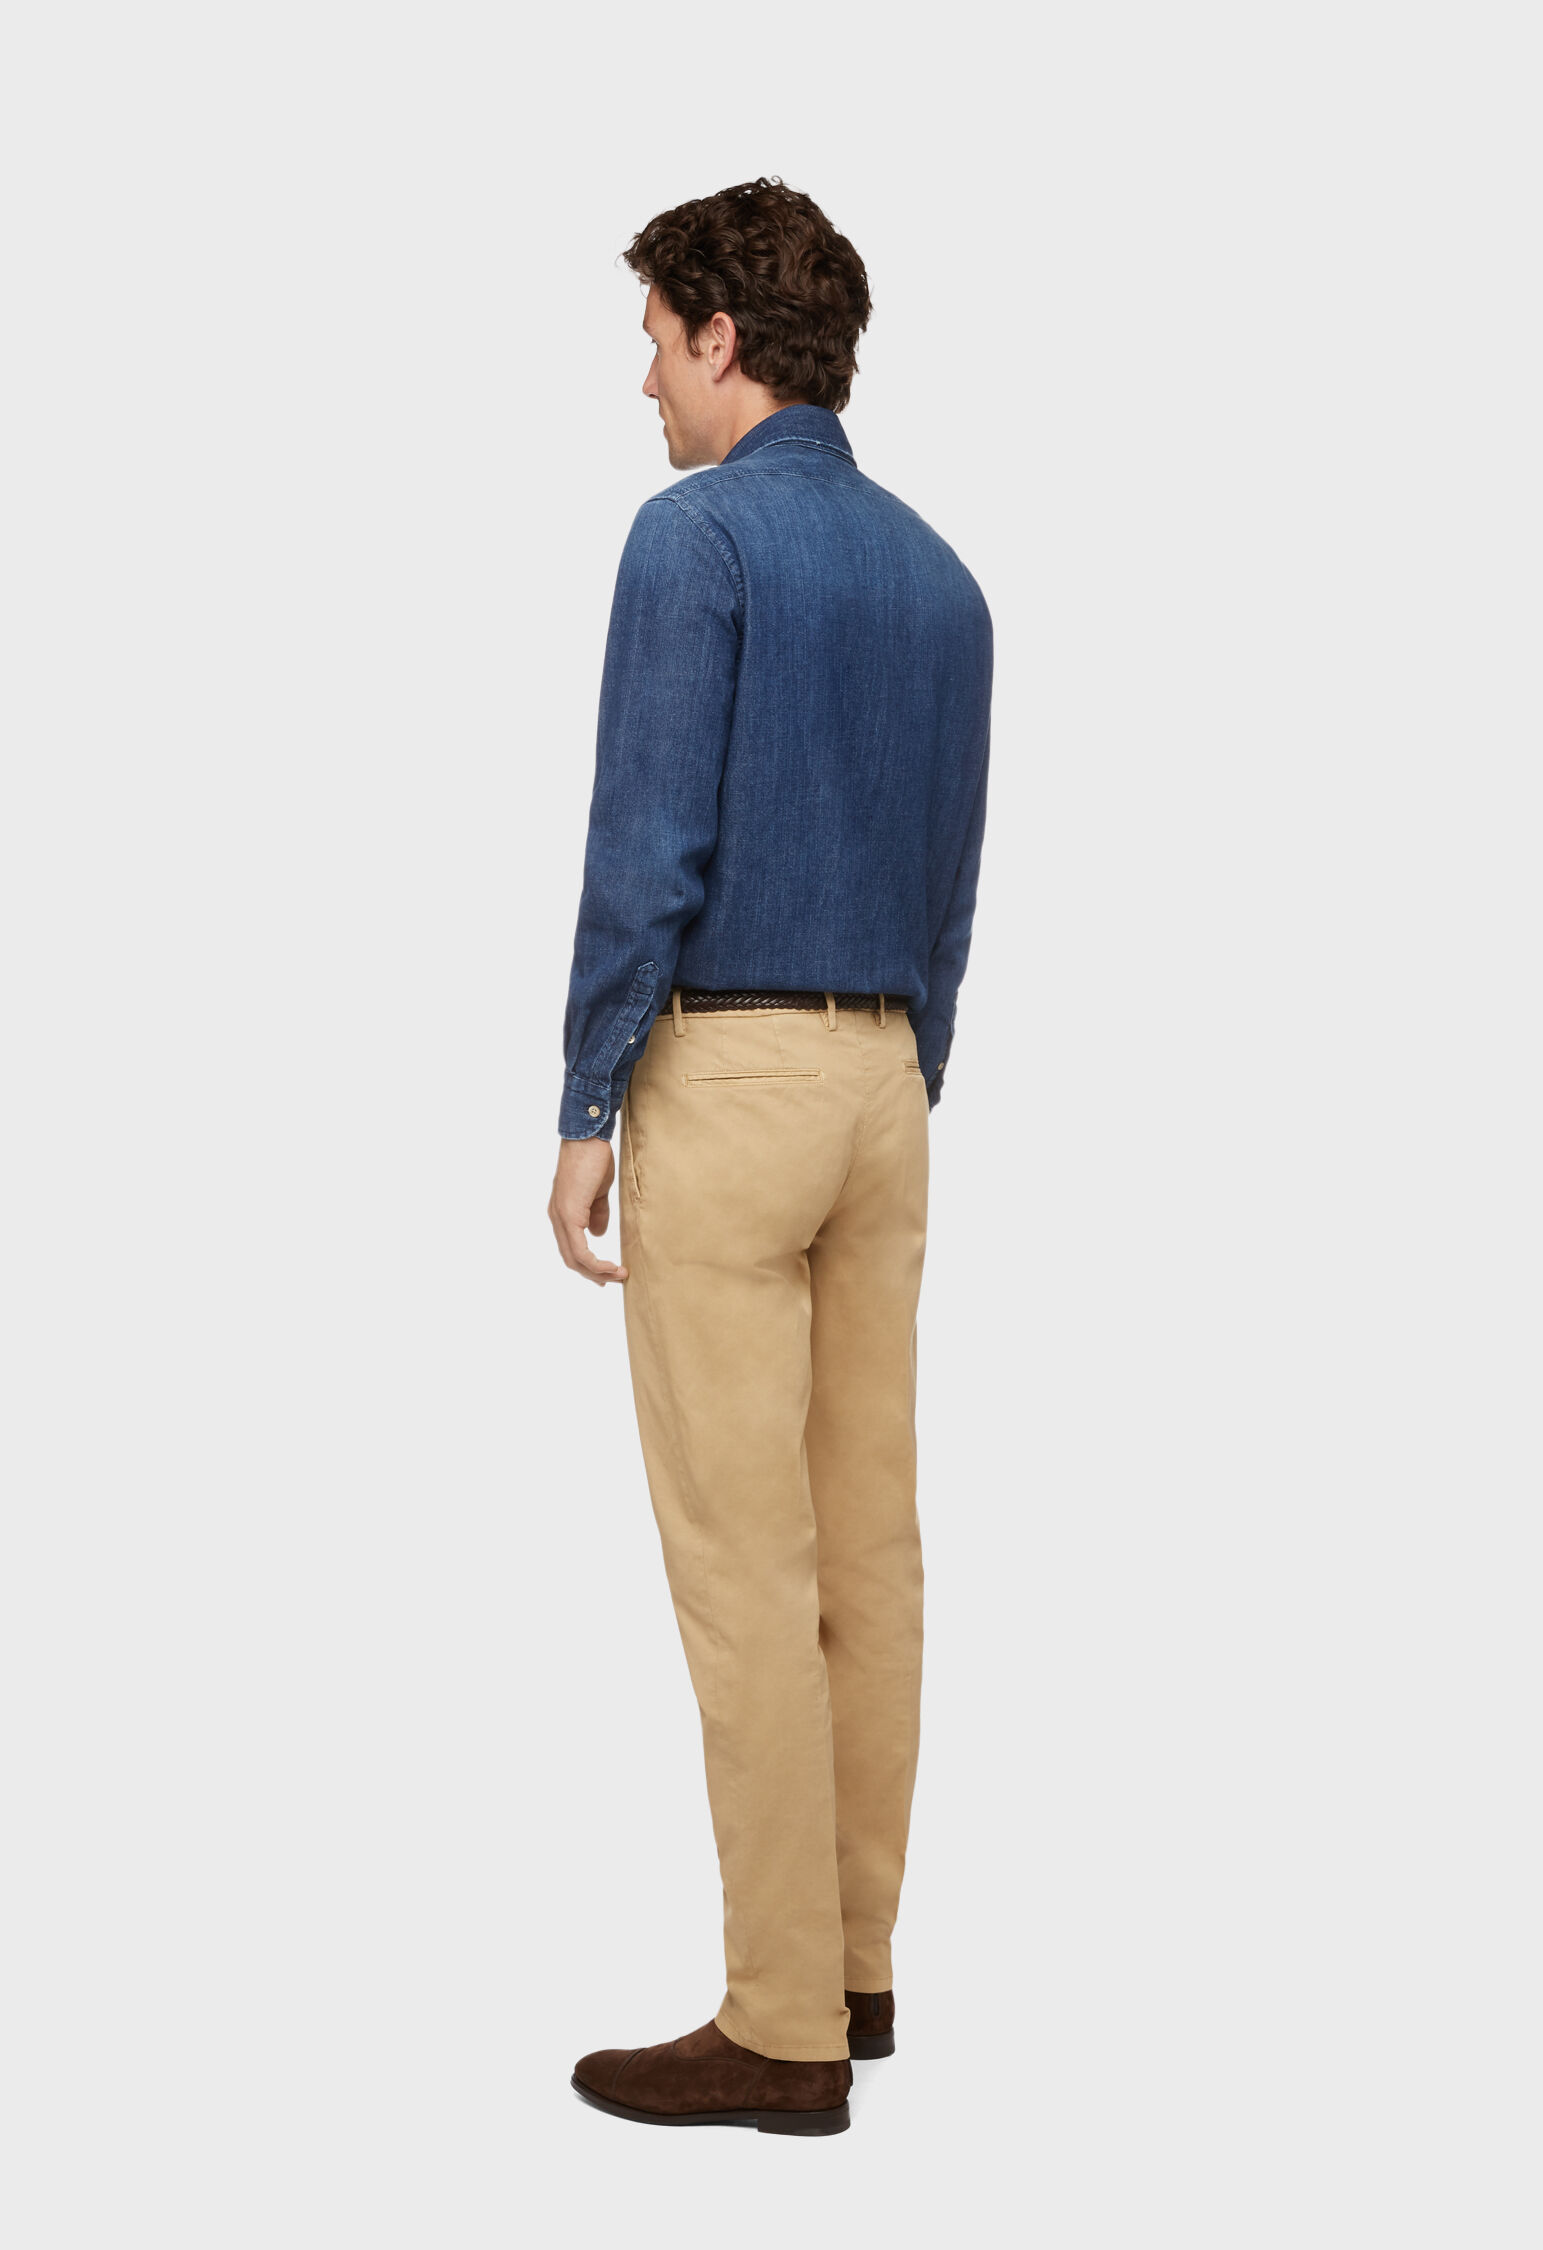 How to wear chinos formally ? - THE NINES